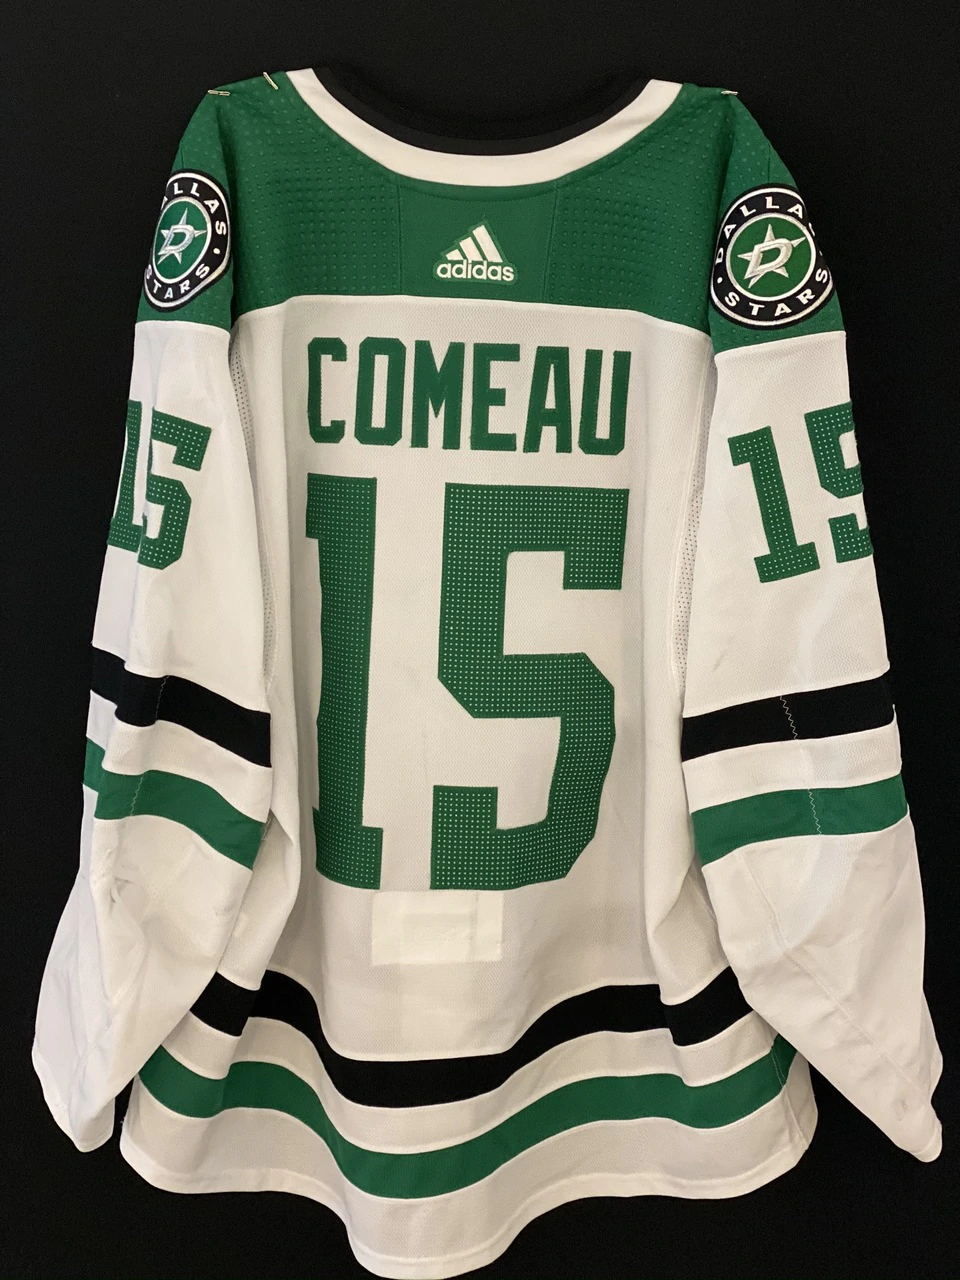 Blake Comeau 19/20 Game Worn Away Jersey - Set 3 in Green and White - Back View